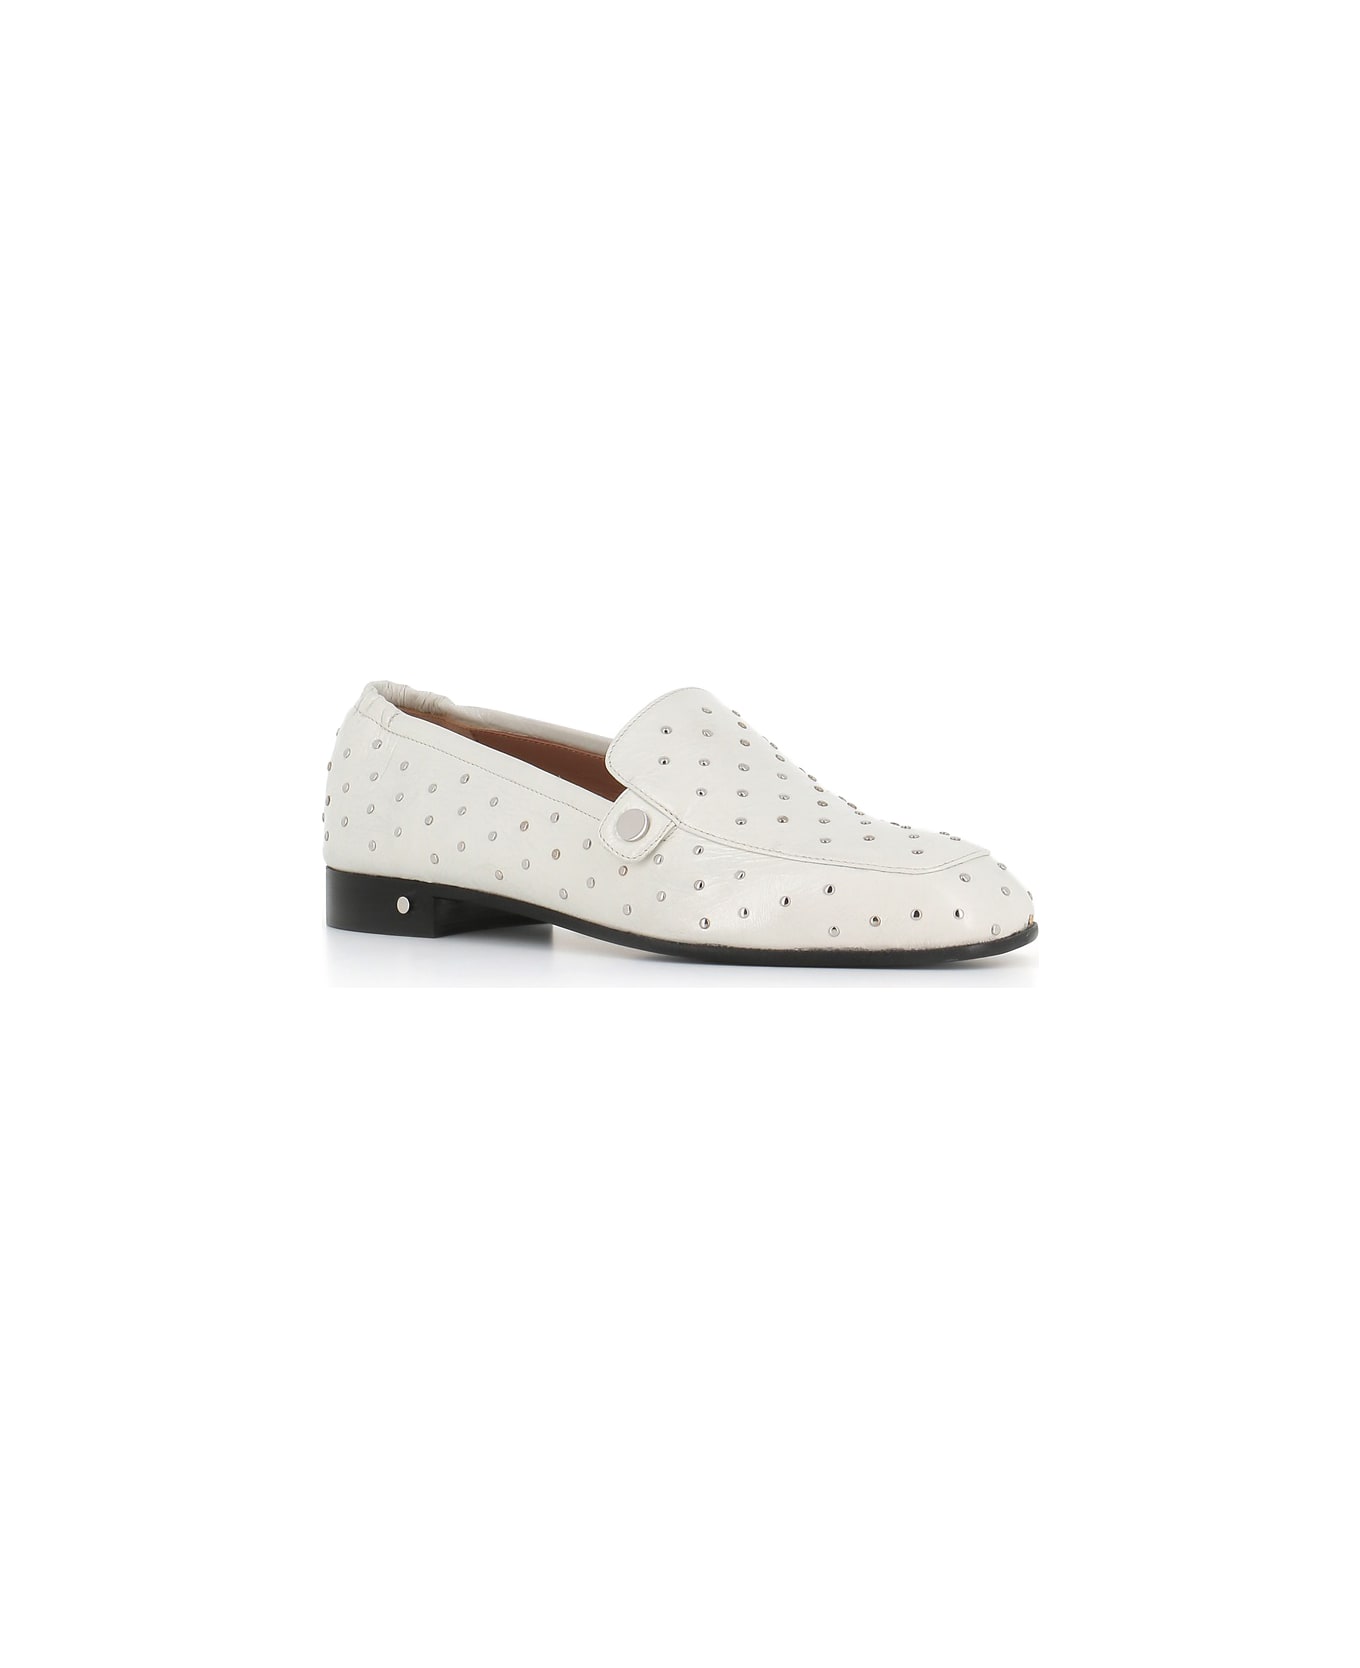 Laurence Dacade Loafer Angela - White